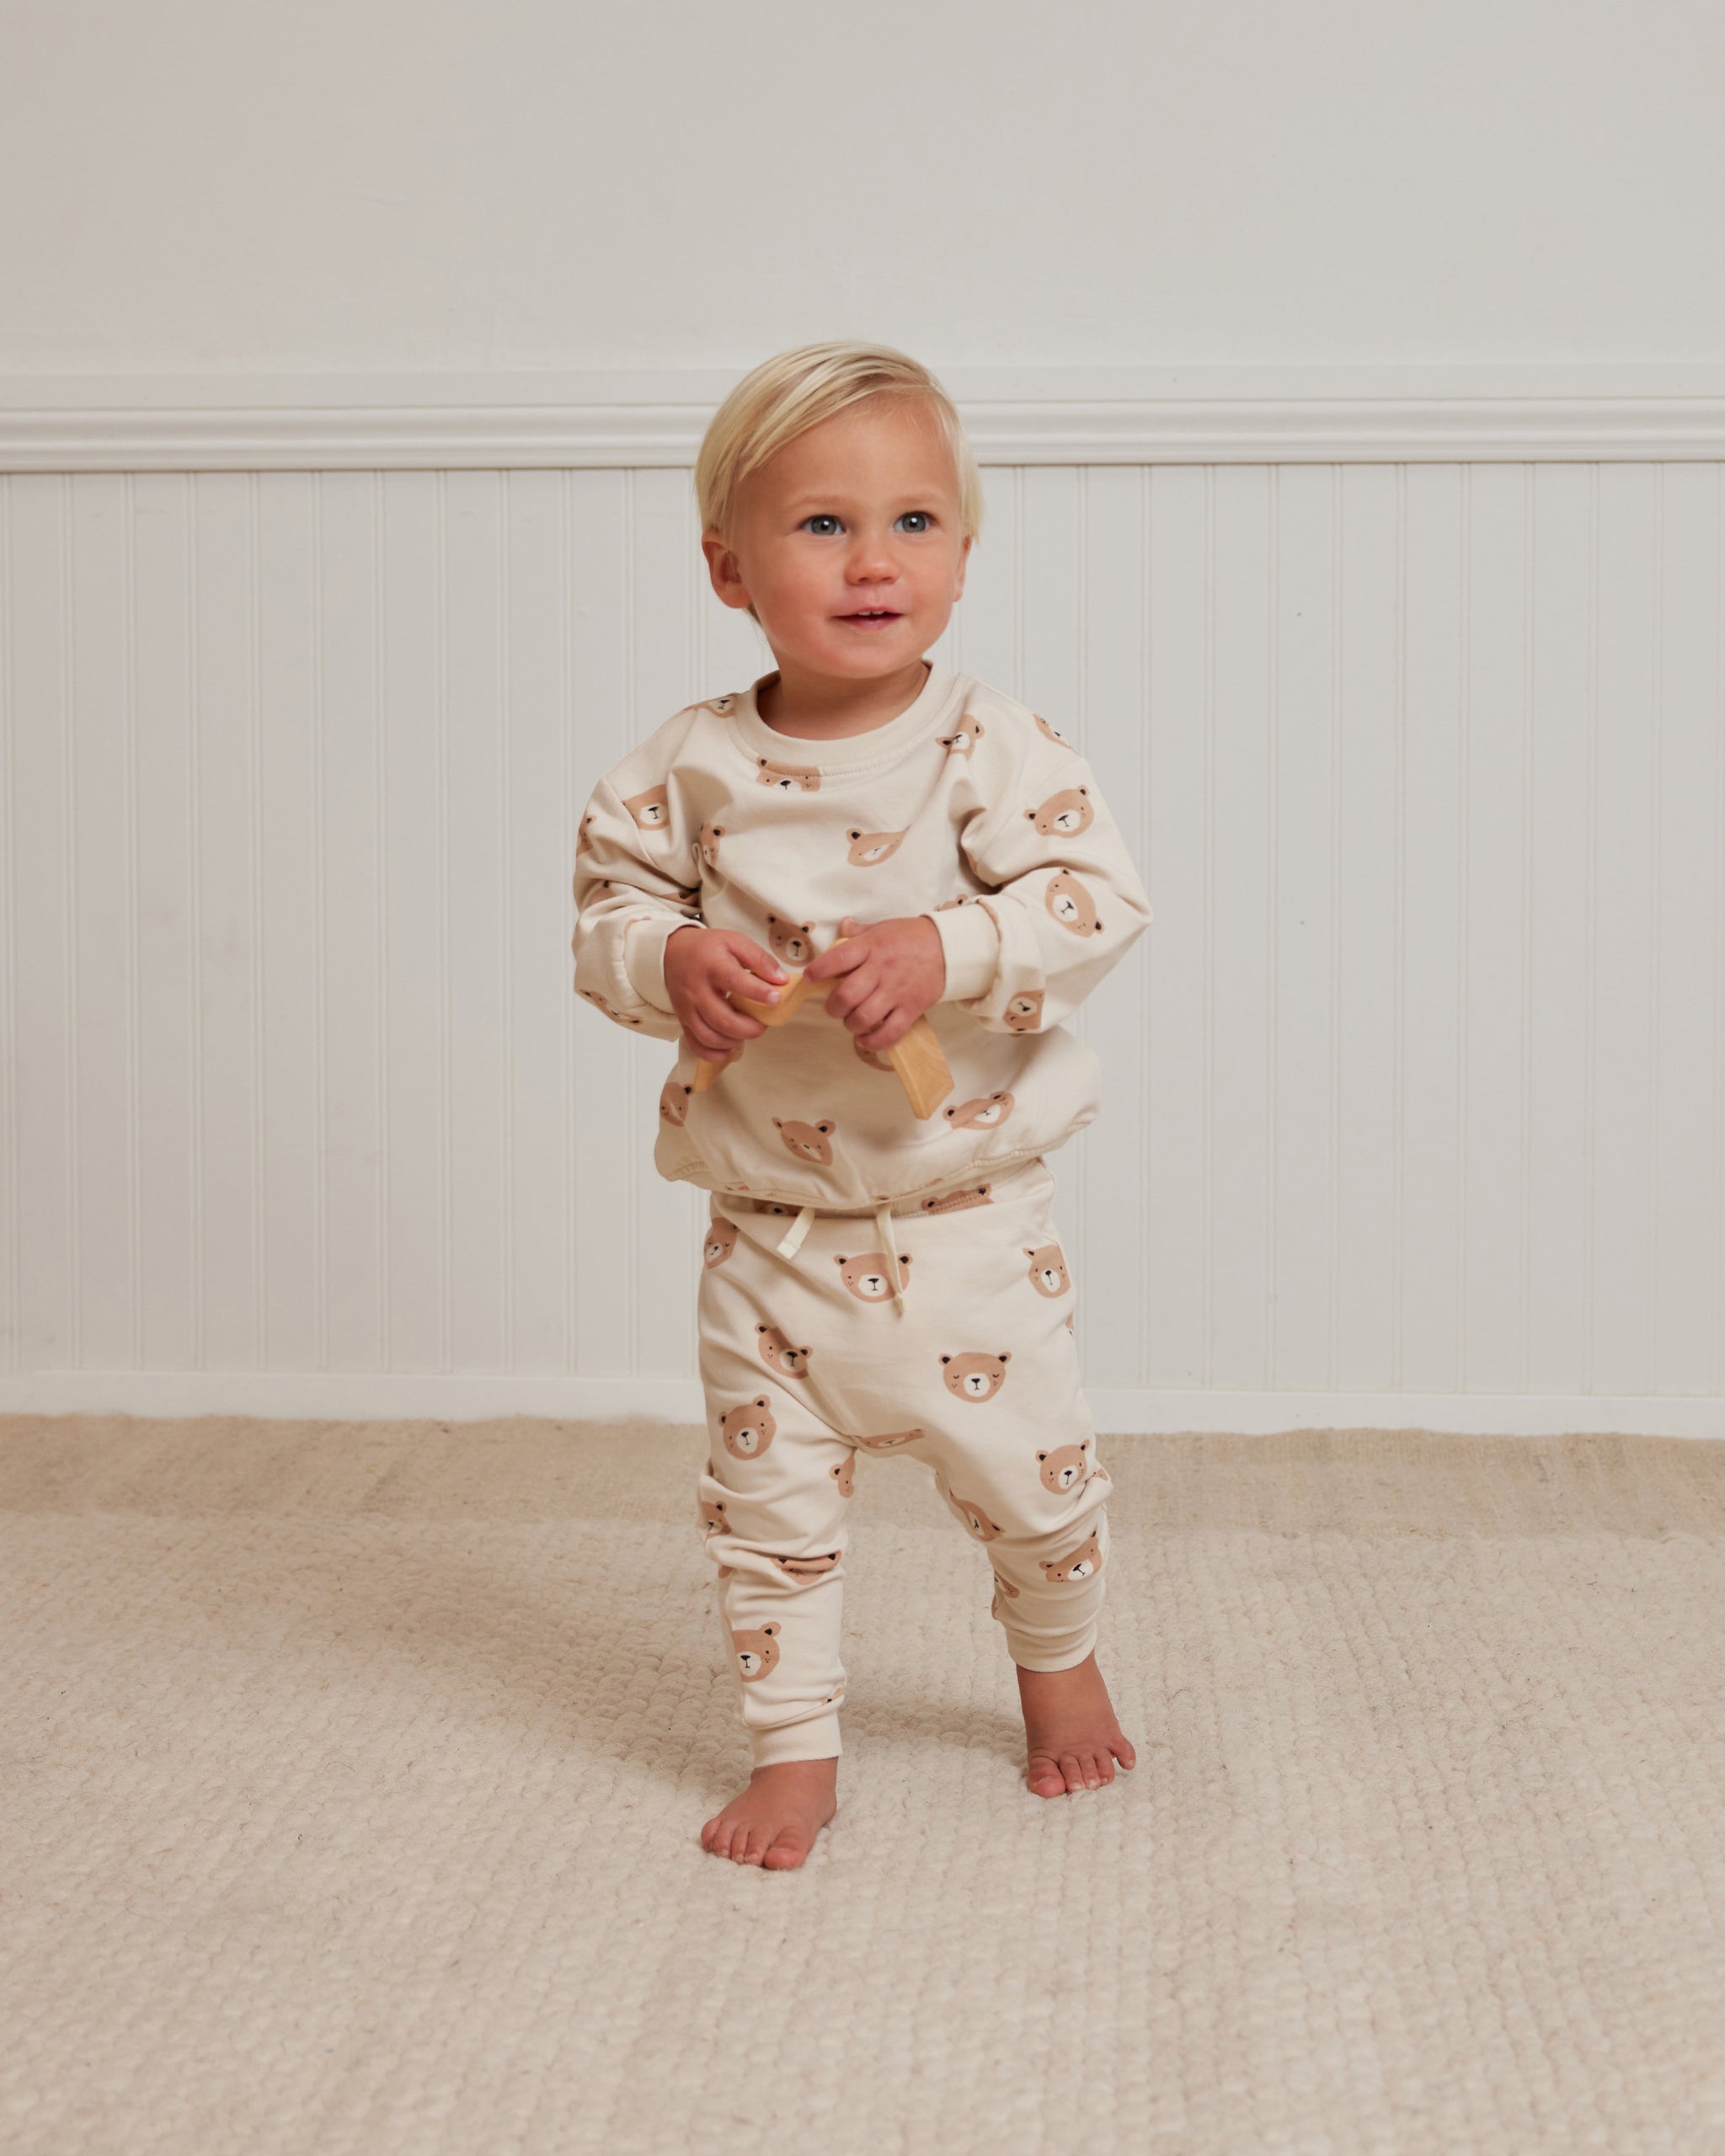 Sweatpant || Teddy - Rylee + Cru | Kids Clothes | Trendy Baby Clothes | Modern Infant Outfits |